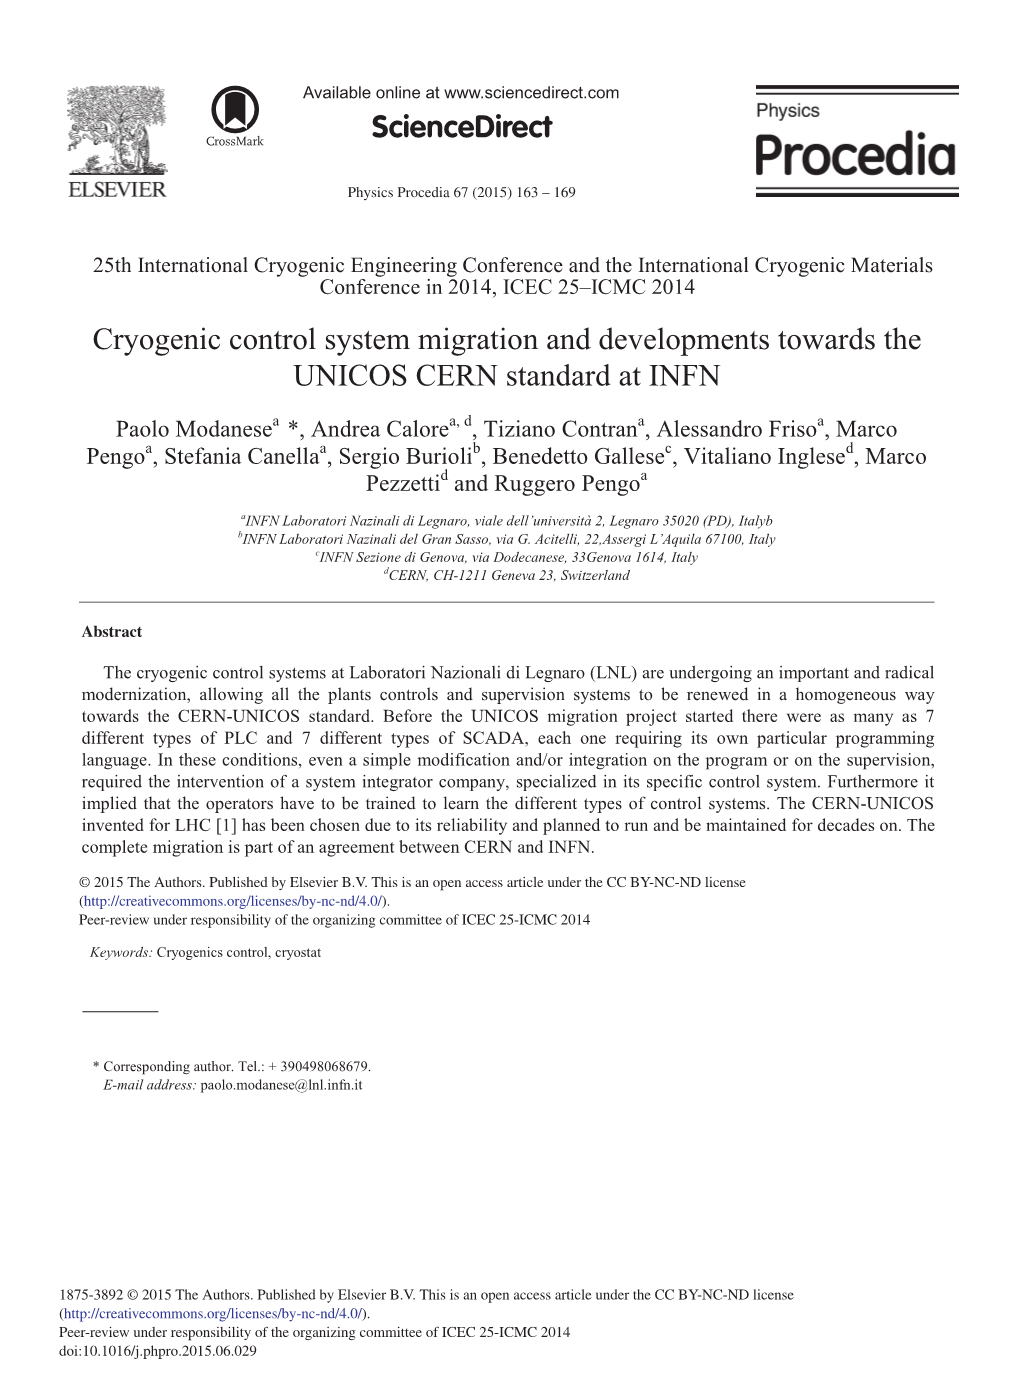 Cryogenic Control System Migration and Developments Towards the UNICOS CERN Standard at INFN